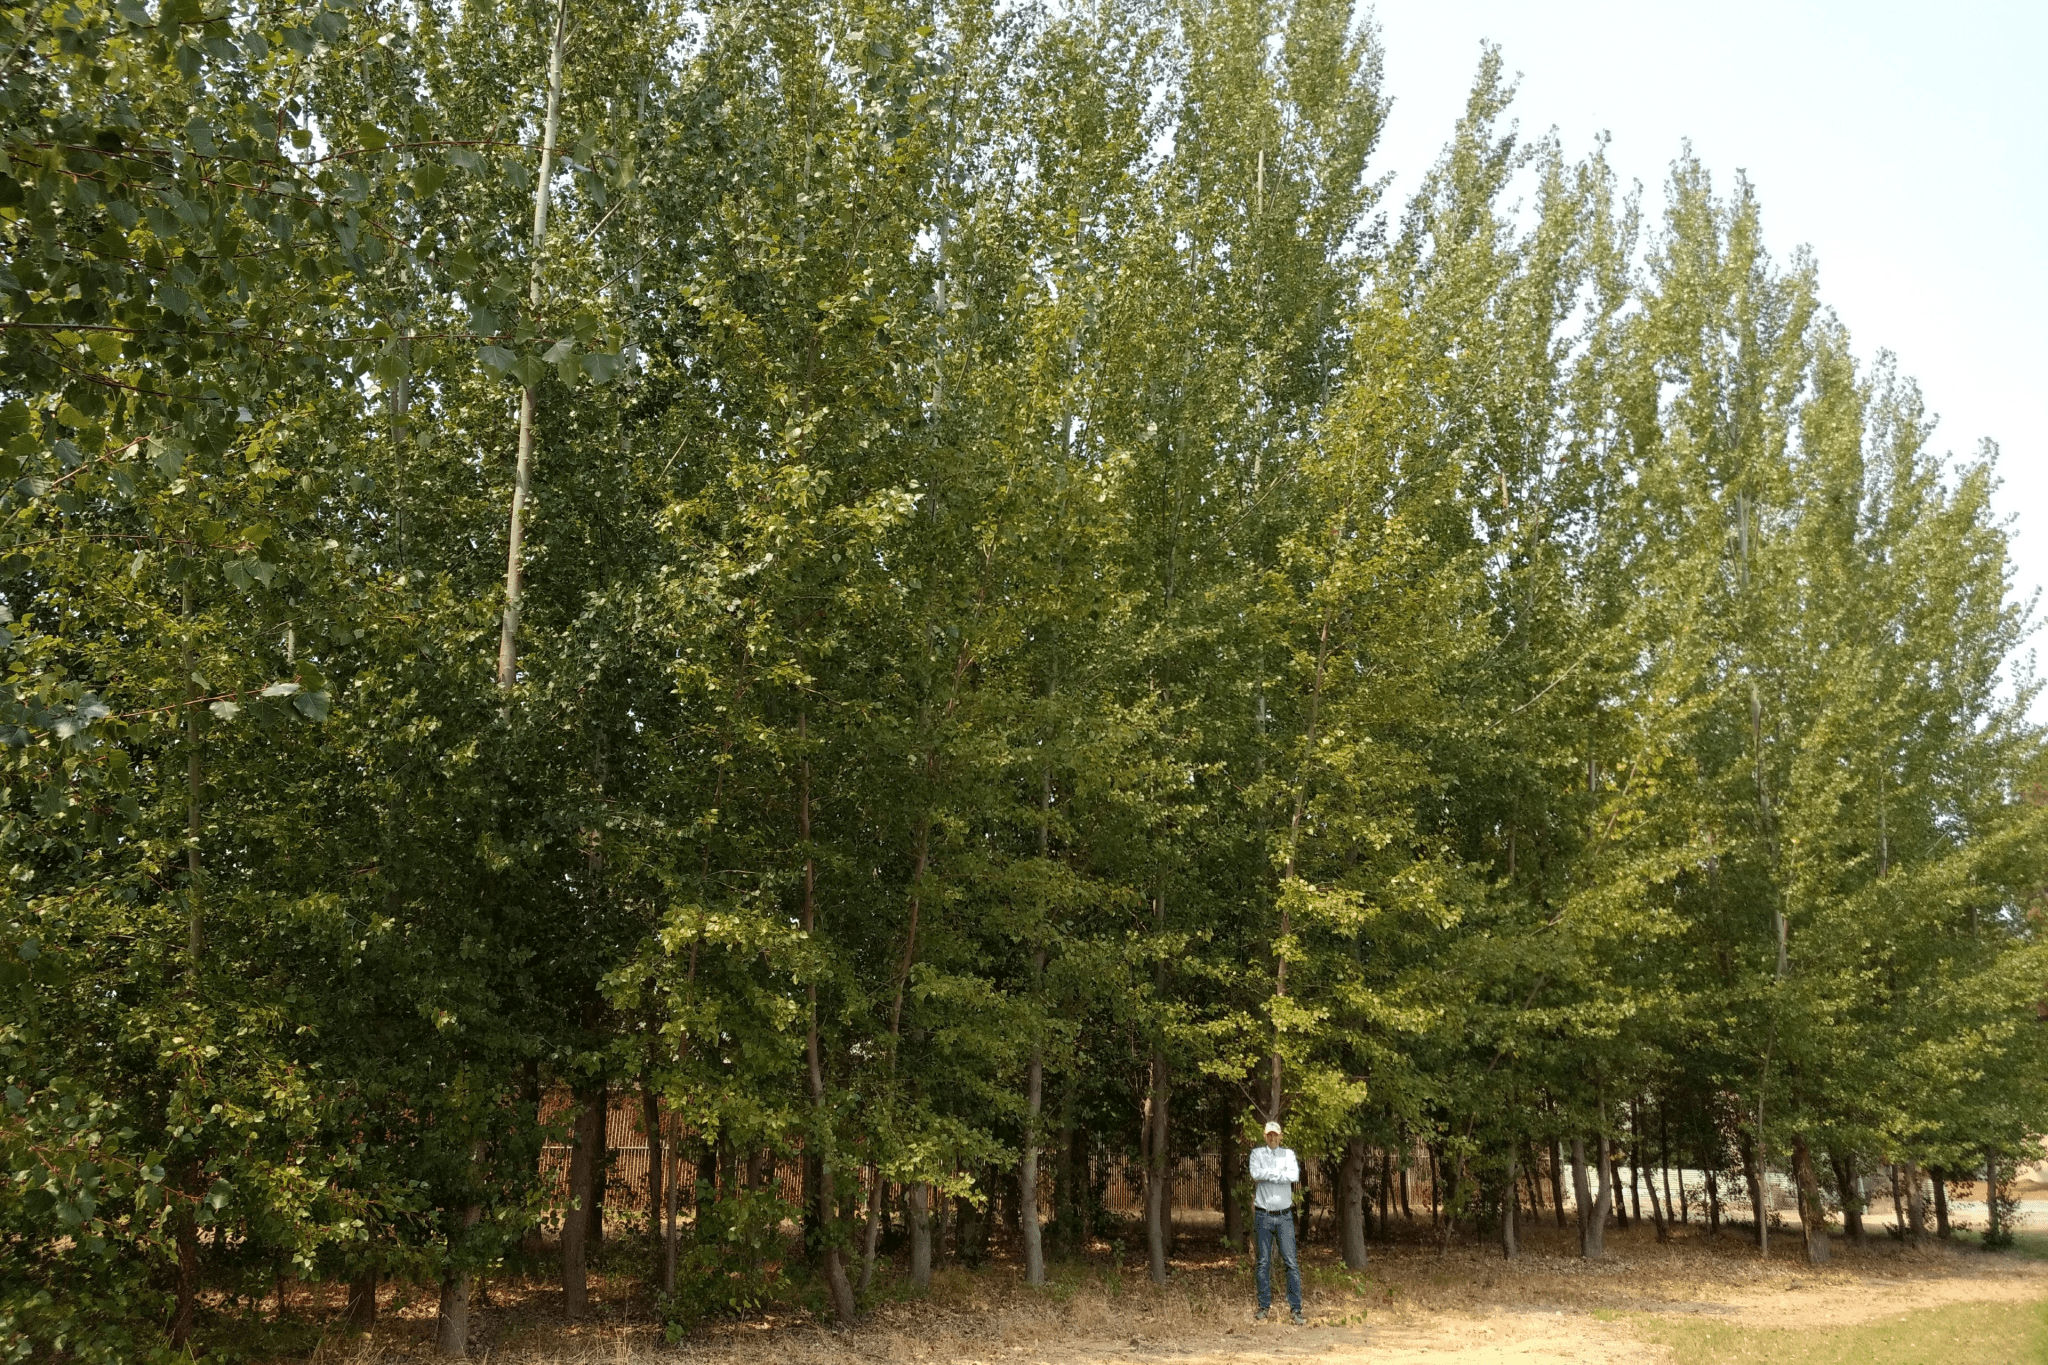 A man stands in front of a grove of tall trees